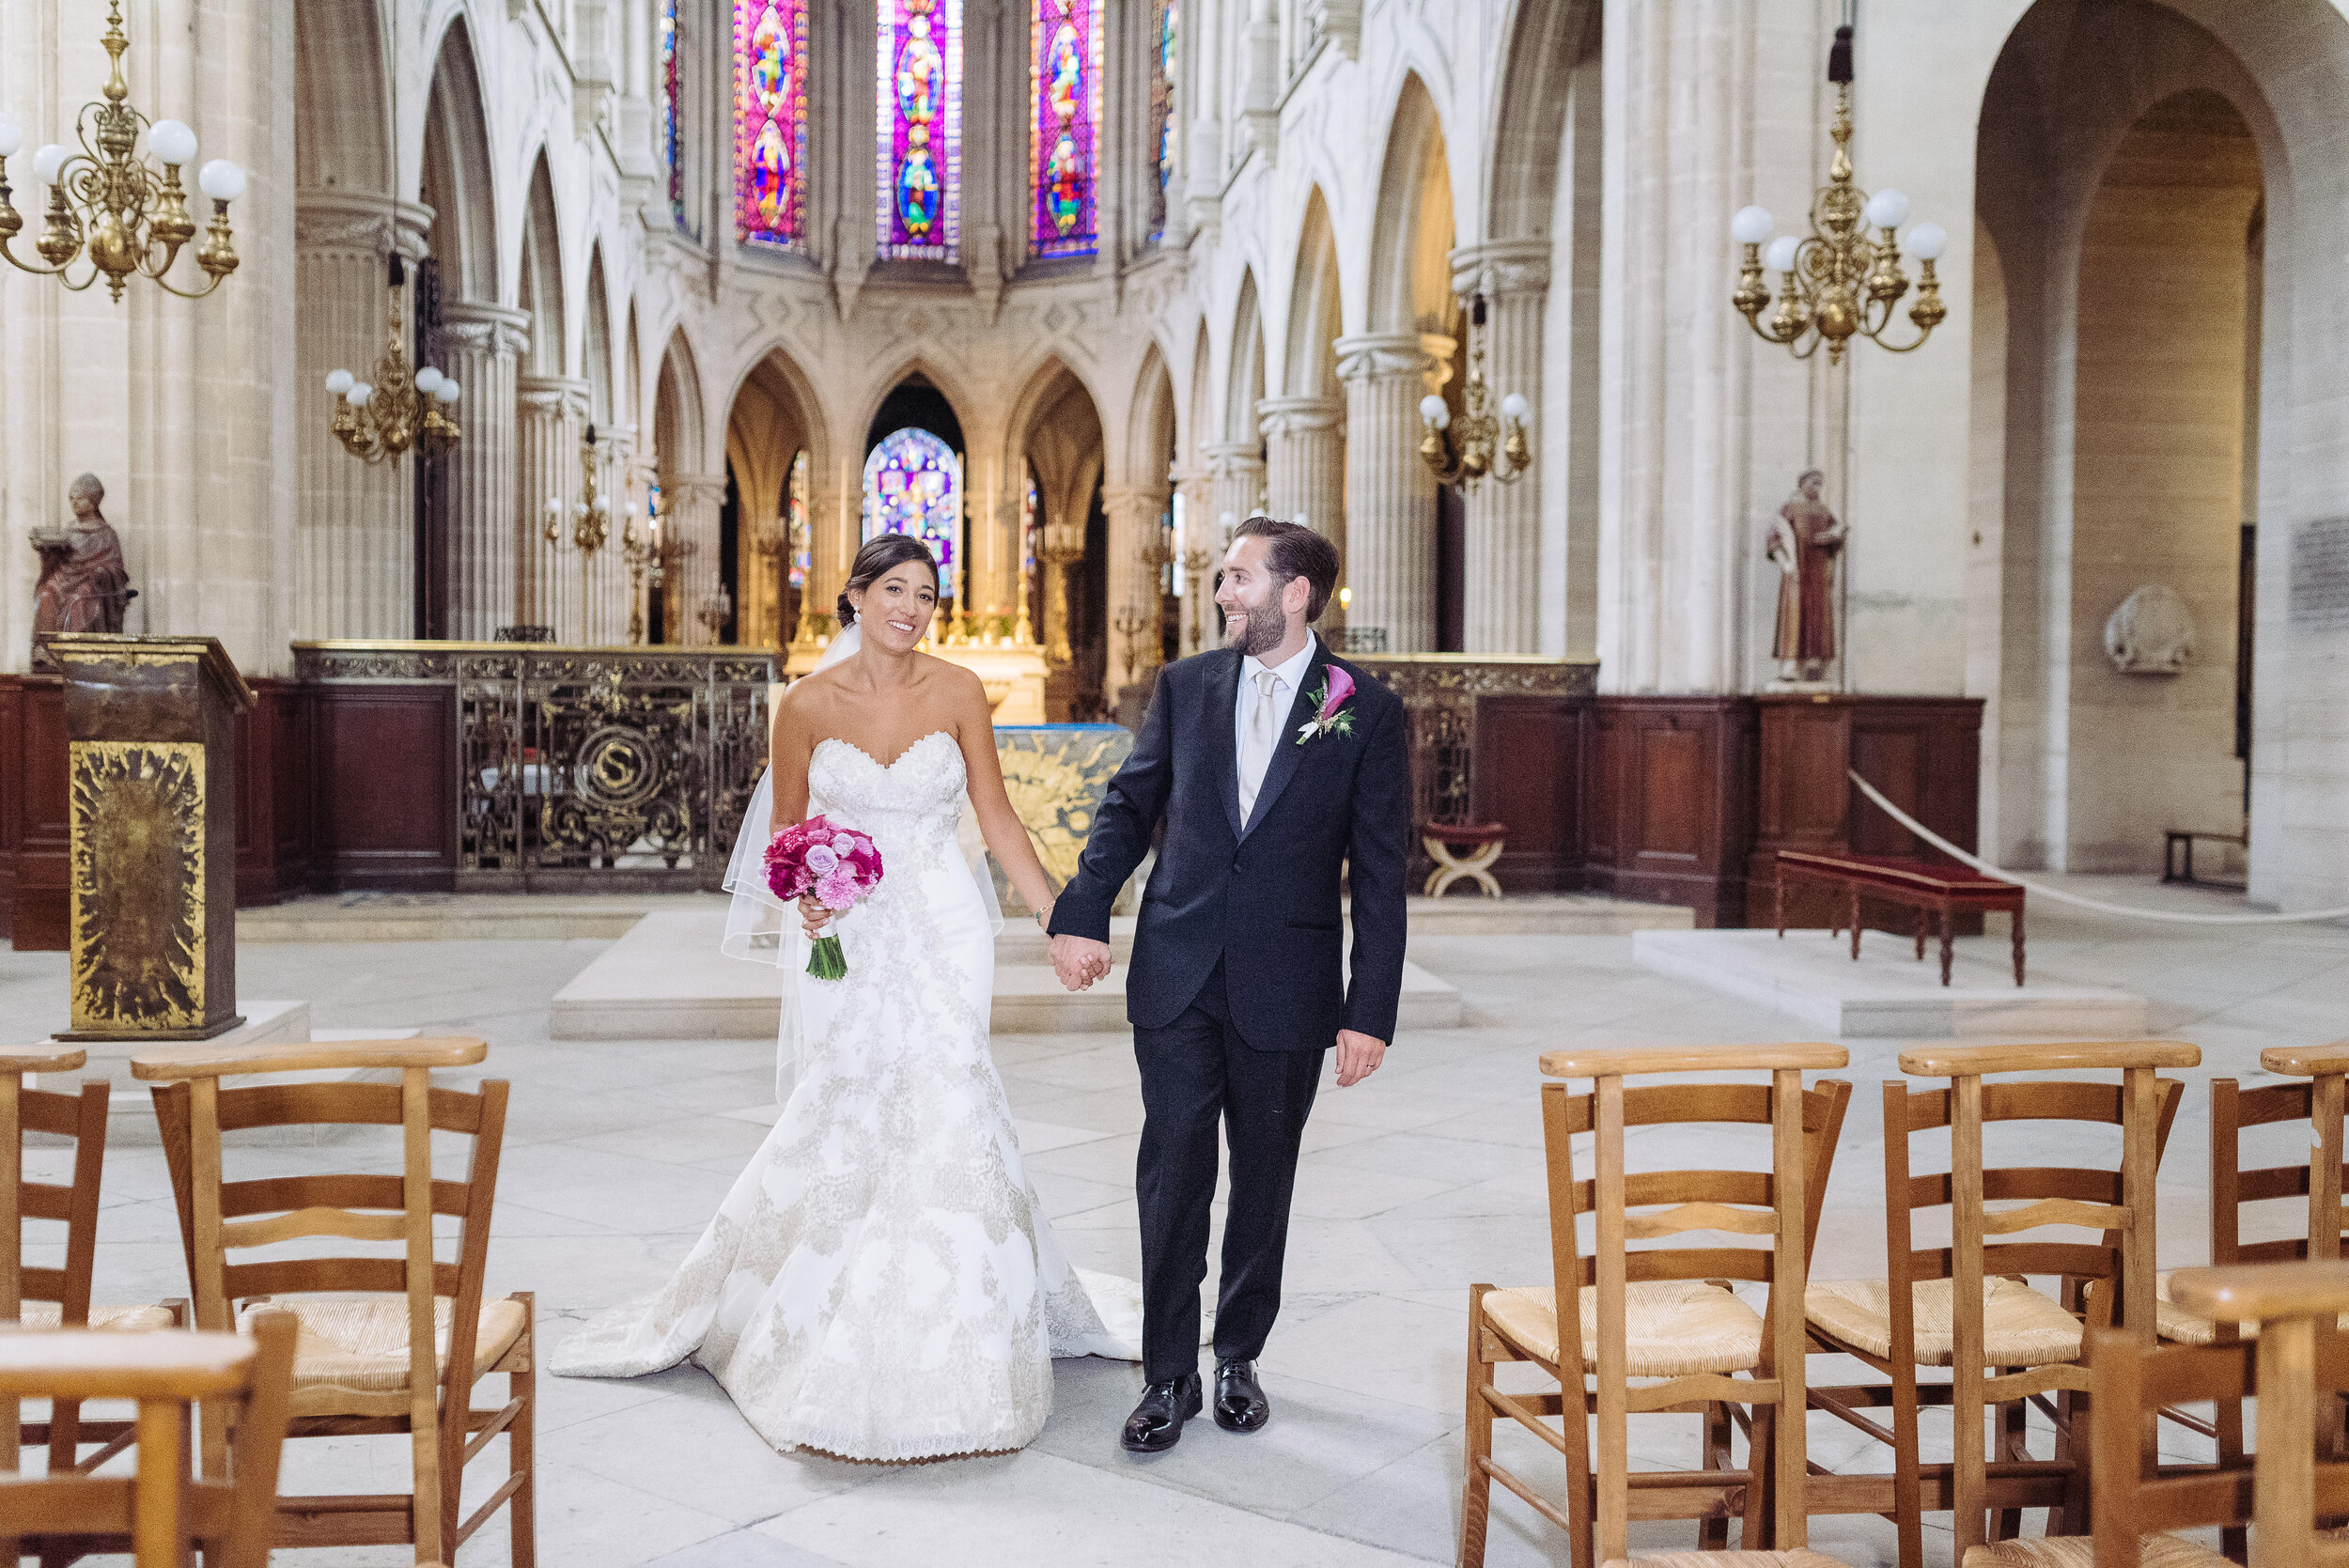 American Church in Paris Wedding Ceremony, Makeup and Hair Styling by Onorina Jomir Beauty, Paris, France. 